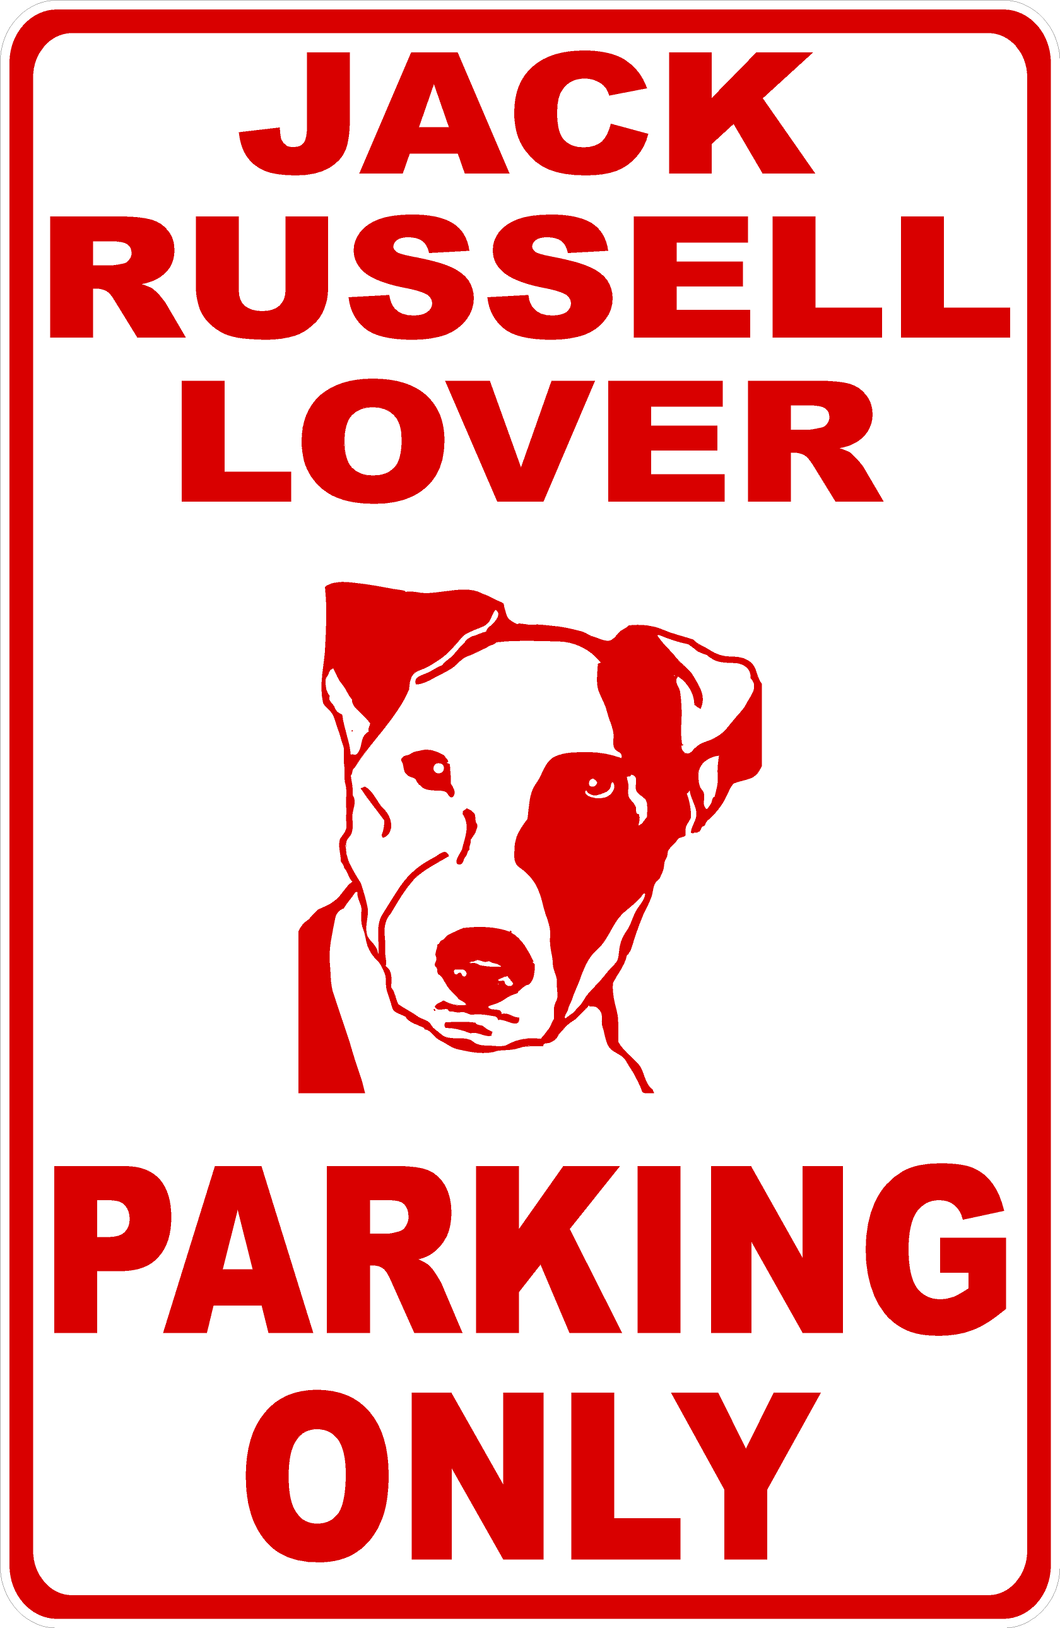 Jack Russell Lover Parking Only Sign